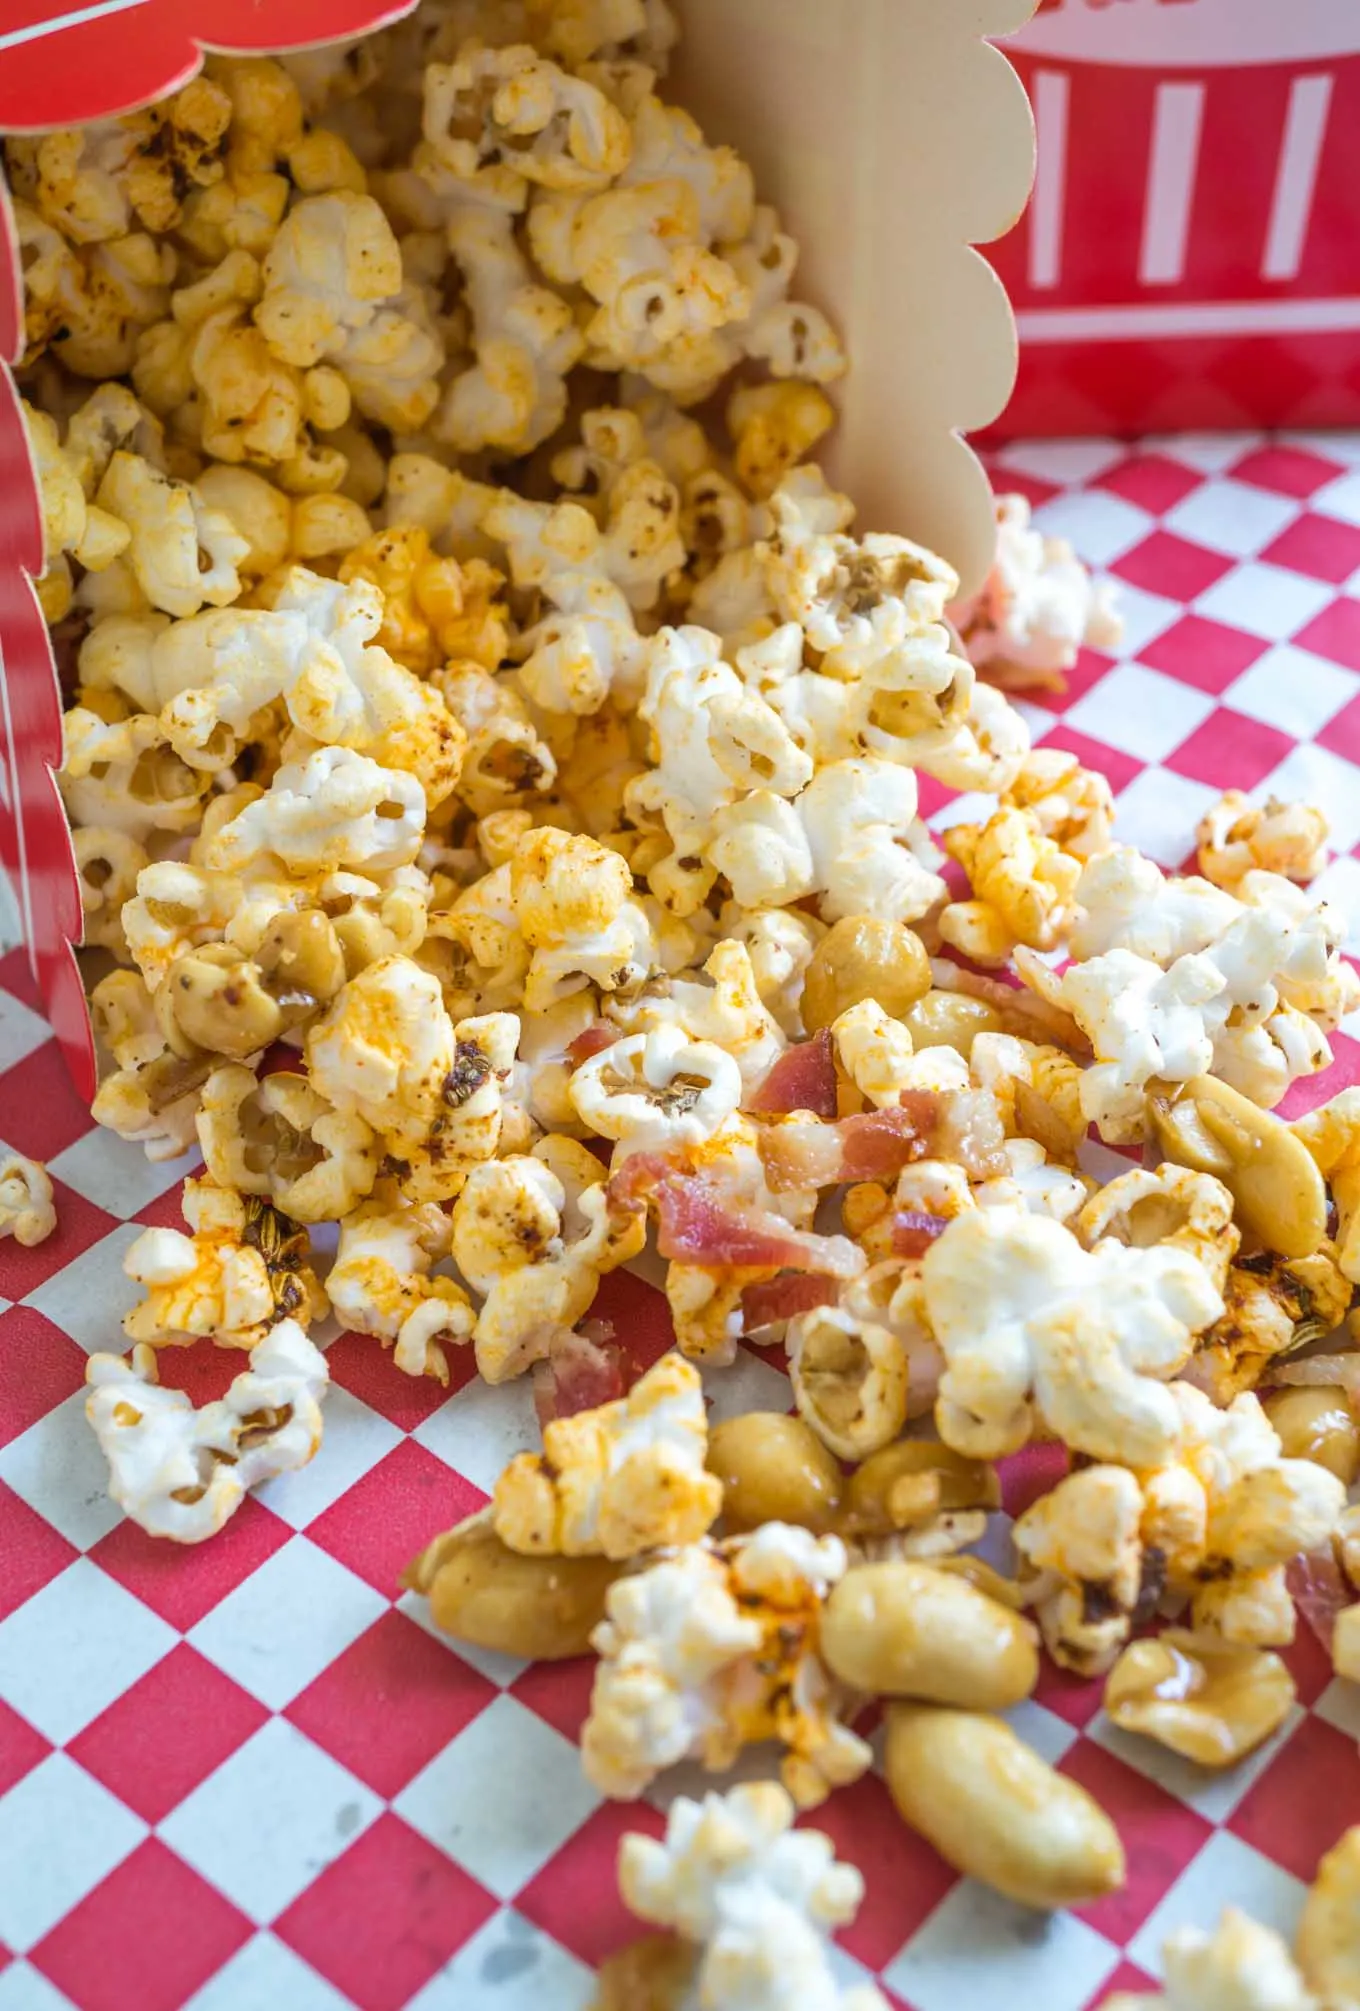 A close-up view of a red and white popcorn box laying on its side with Honey nut popcorn with bacon spilling out onto a red checked napkin.